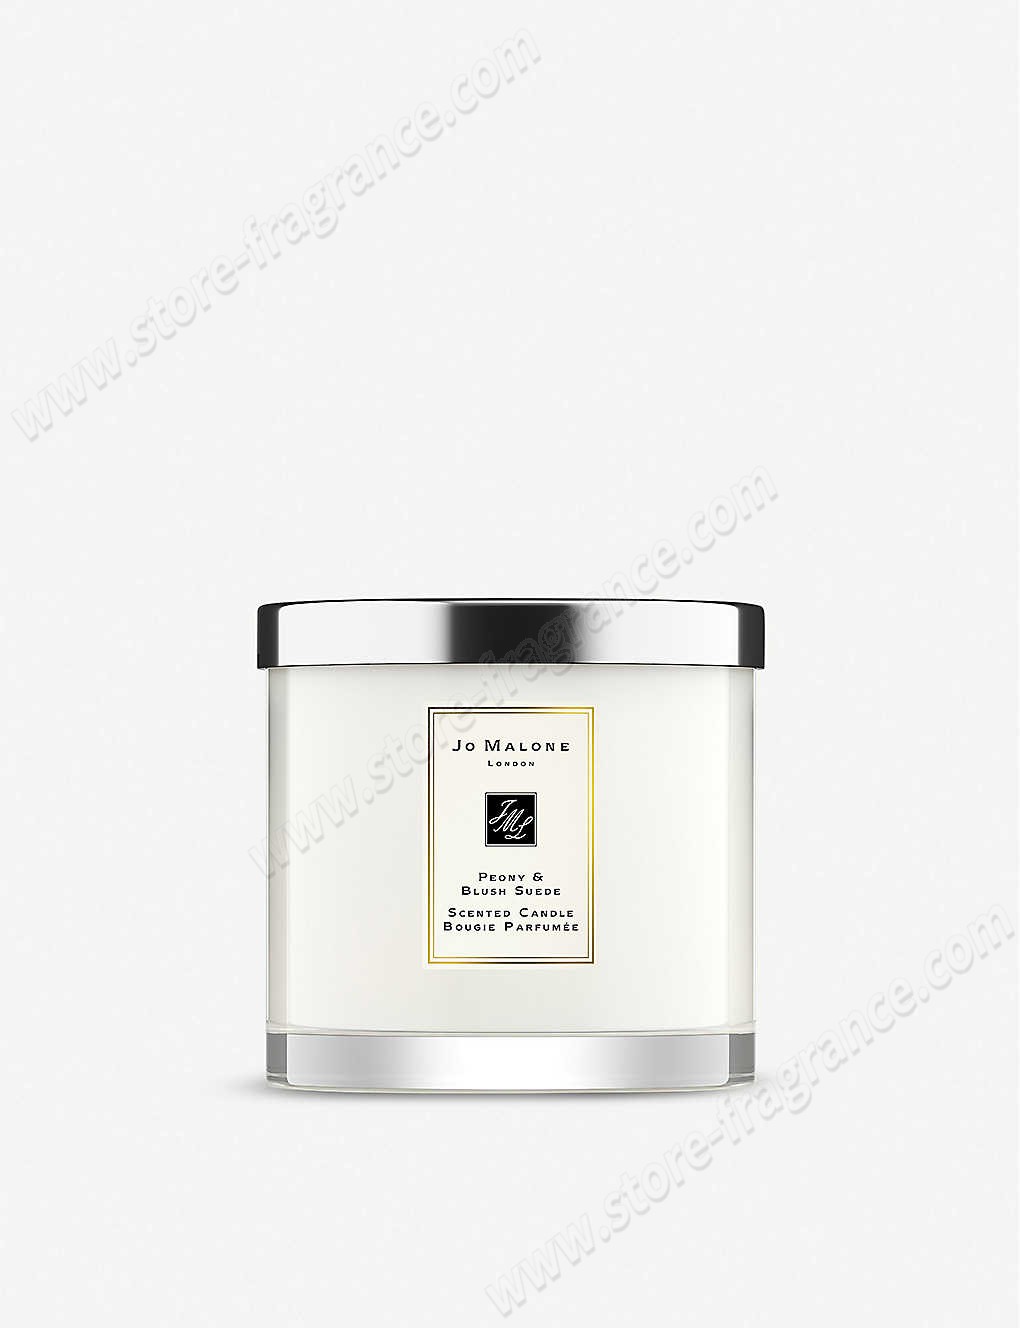 JO MALONE LONDON/Peony and Blush Suede deluxe candle 600g ✿ Discount Store - JO MALONE LONDON/Peony and Blush Suede deluxe candle 600g ✿ Discount Store